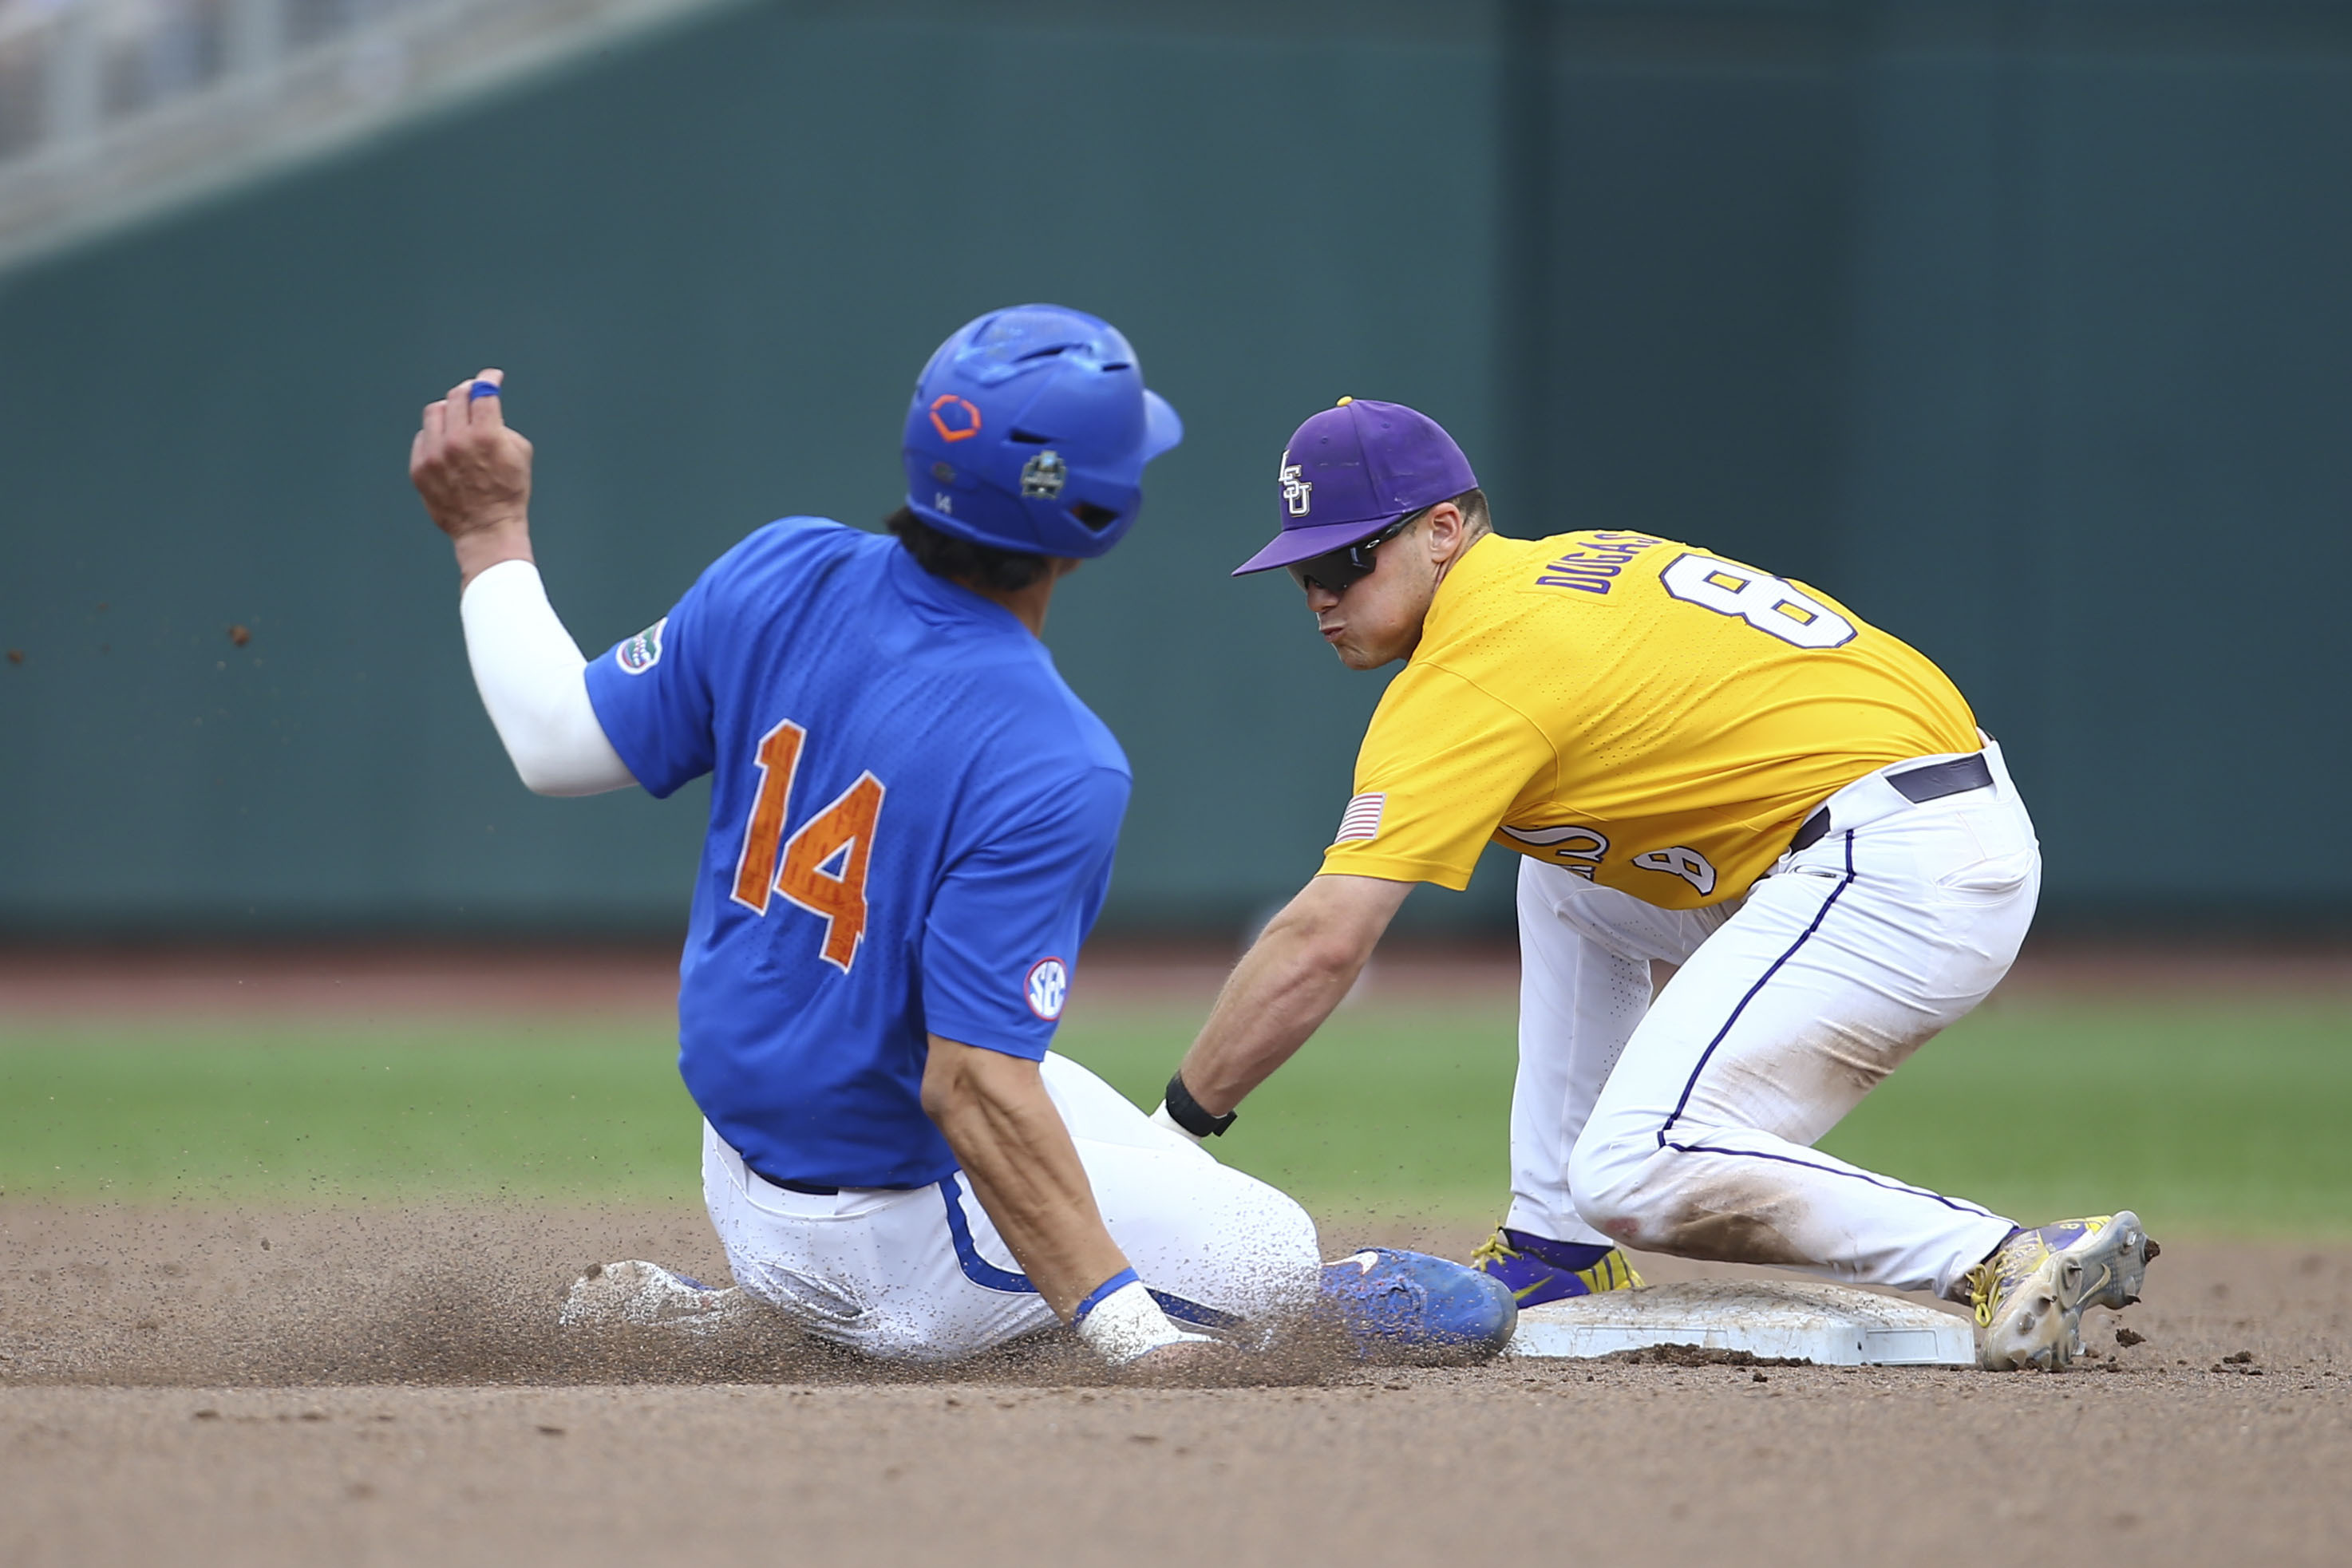 Florida Baseball Preview: Gators travel to Kentucky for weekend series